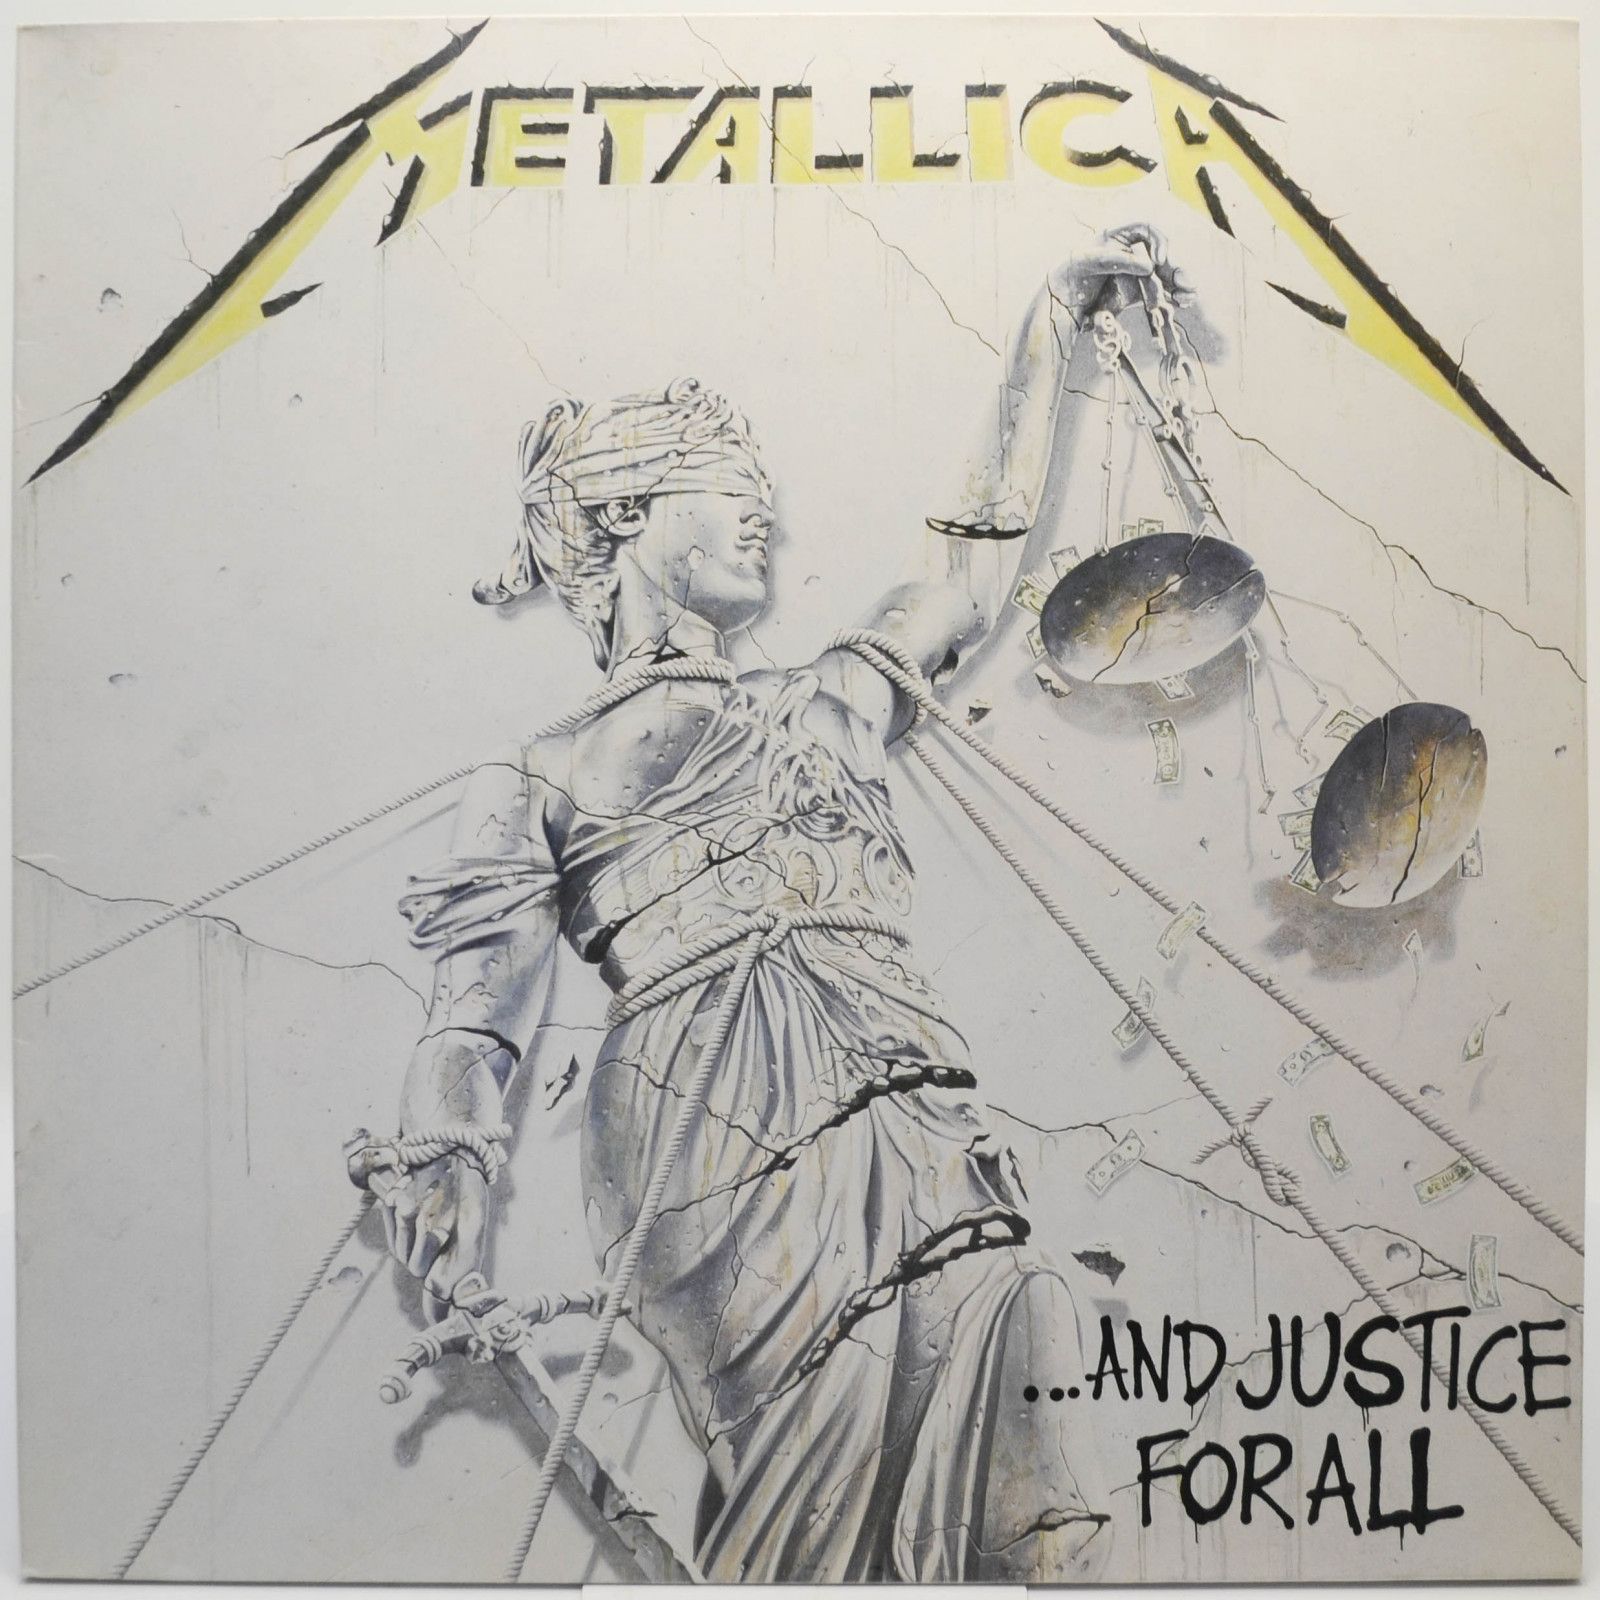 Metallica — ...And Justice For All (2LP), 1988